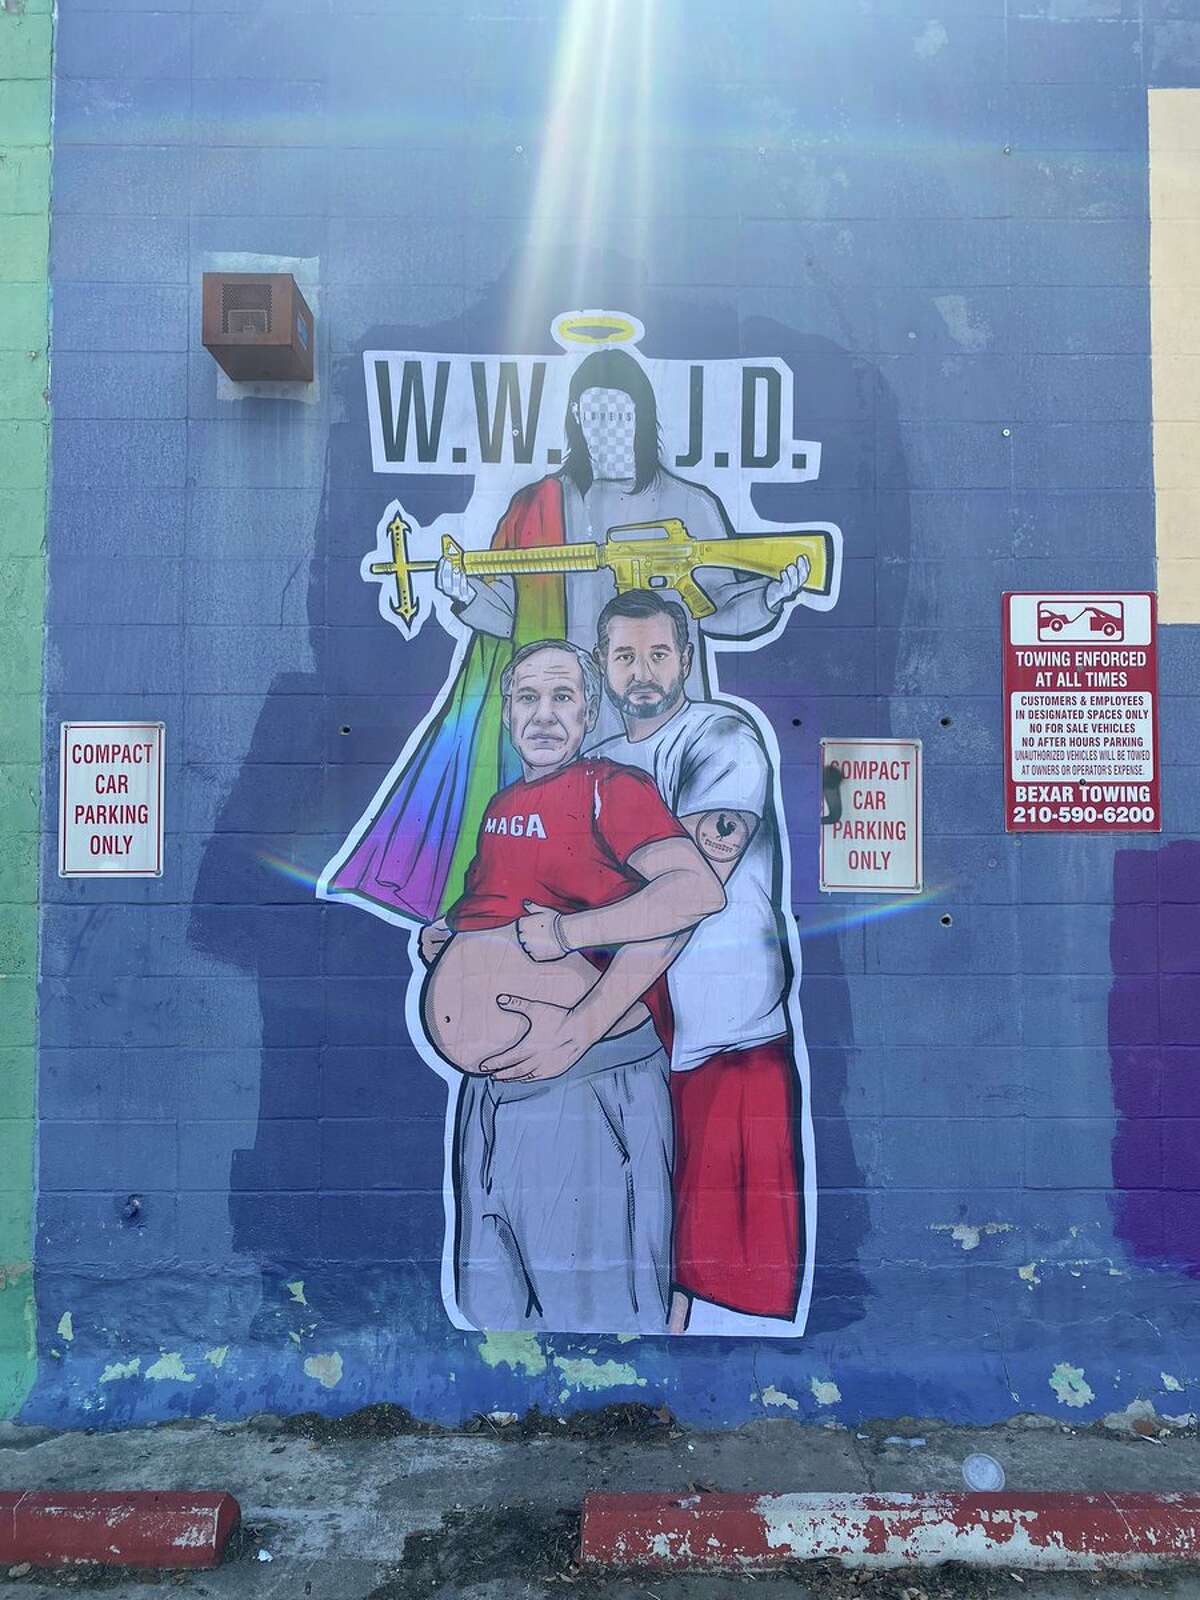 A massive sticker appeared in Southtown showing a pregnant Greg Abbott and Ted Cruz as his partner popped up on the side of an abandoned building.